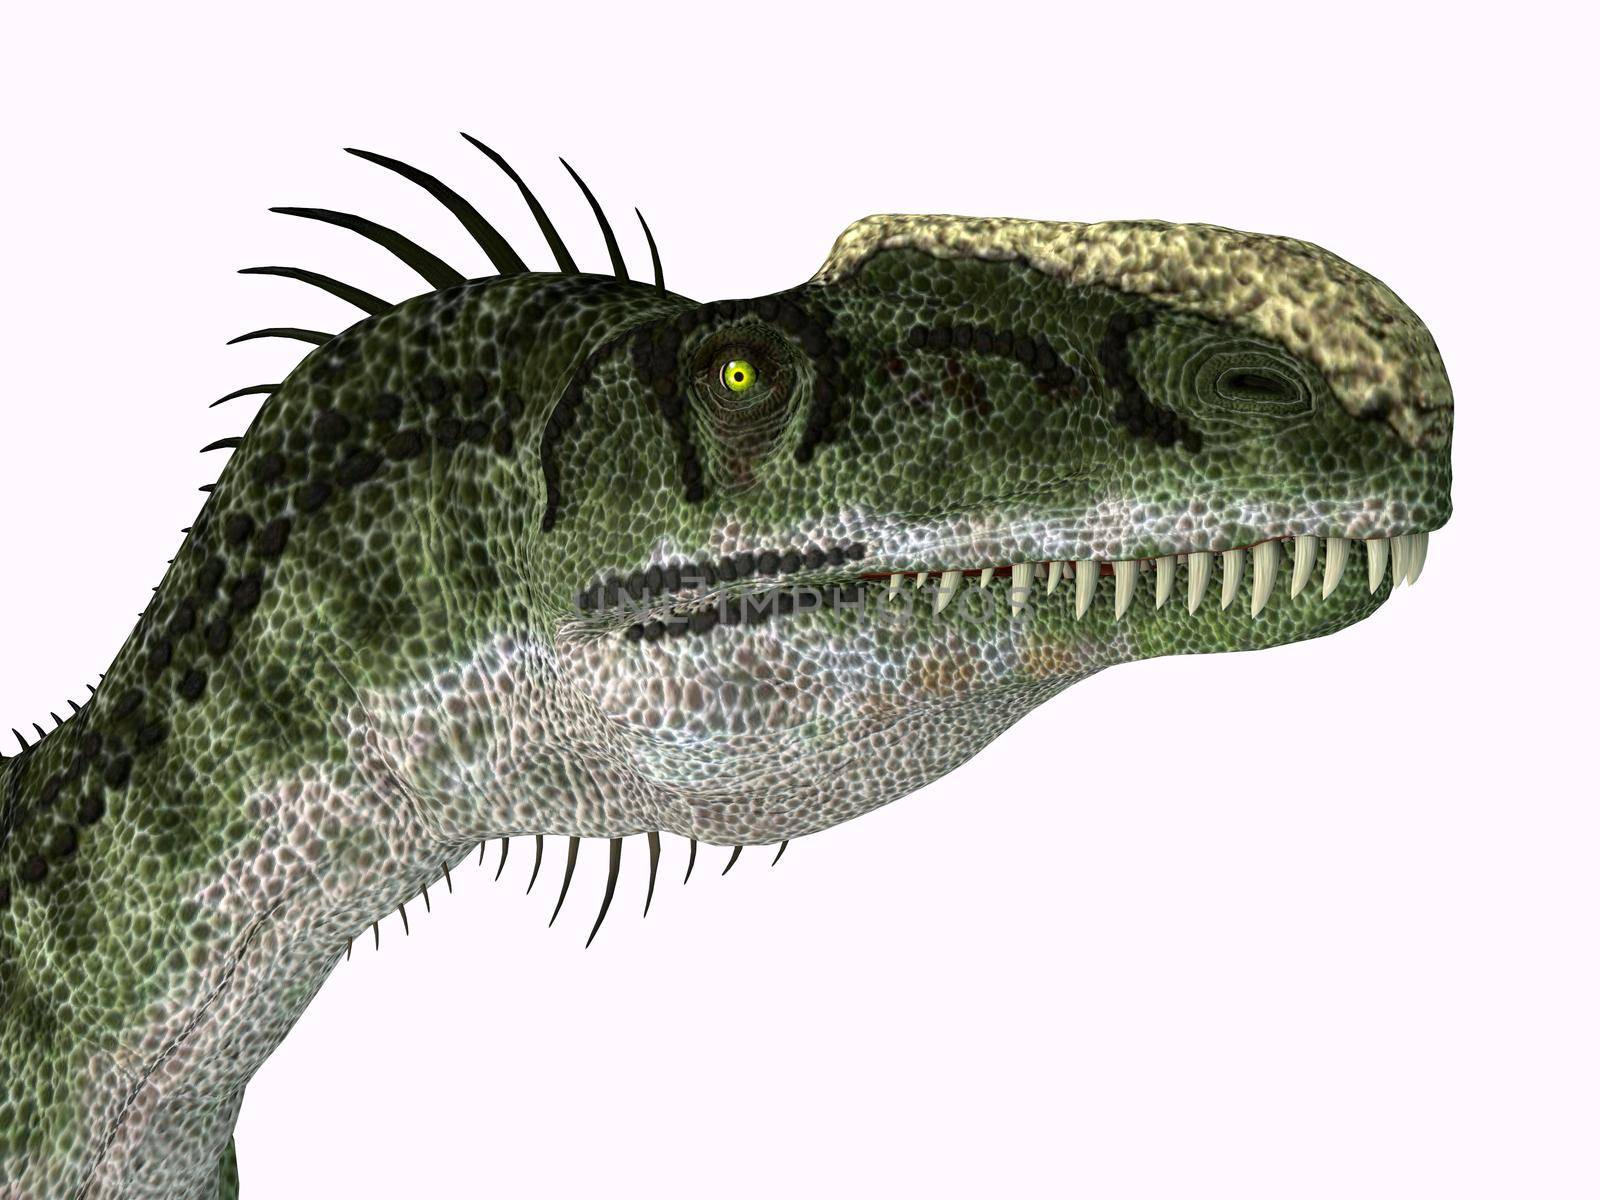 Monolophosaurus was a carnivorous theropod dinosaur that lived in China during the Jurassic Period.